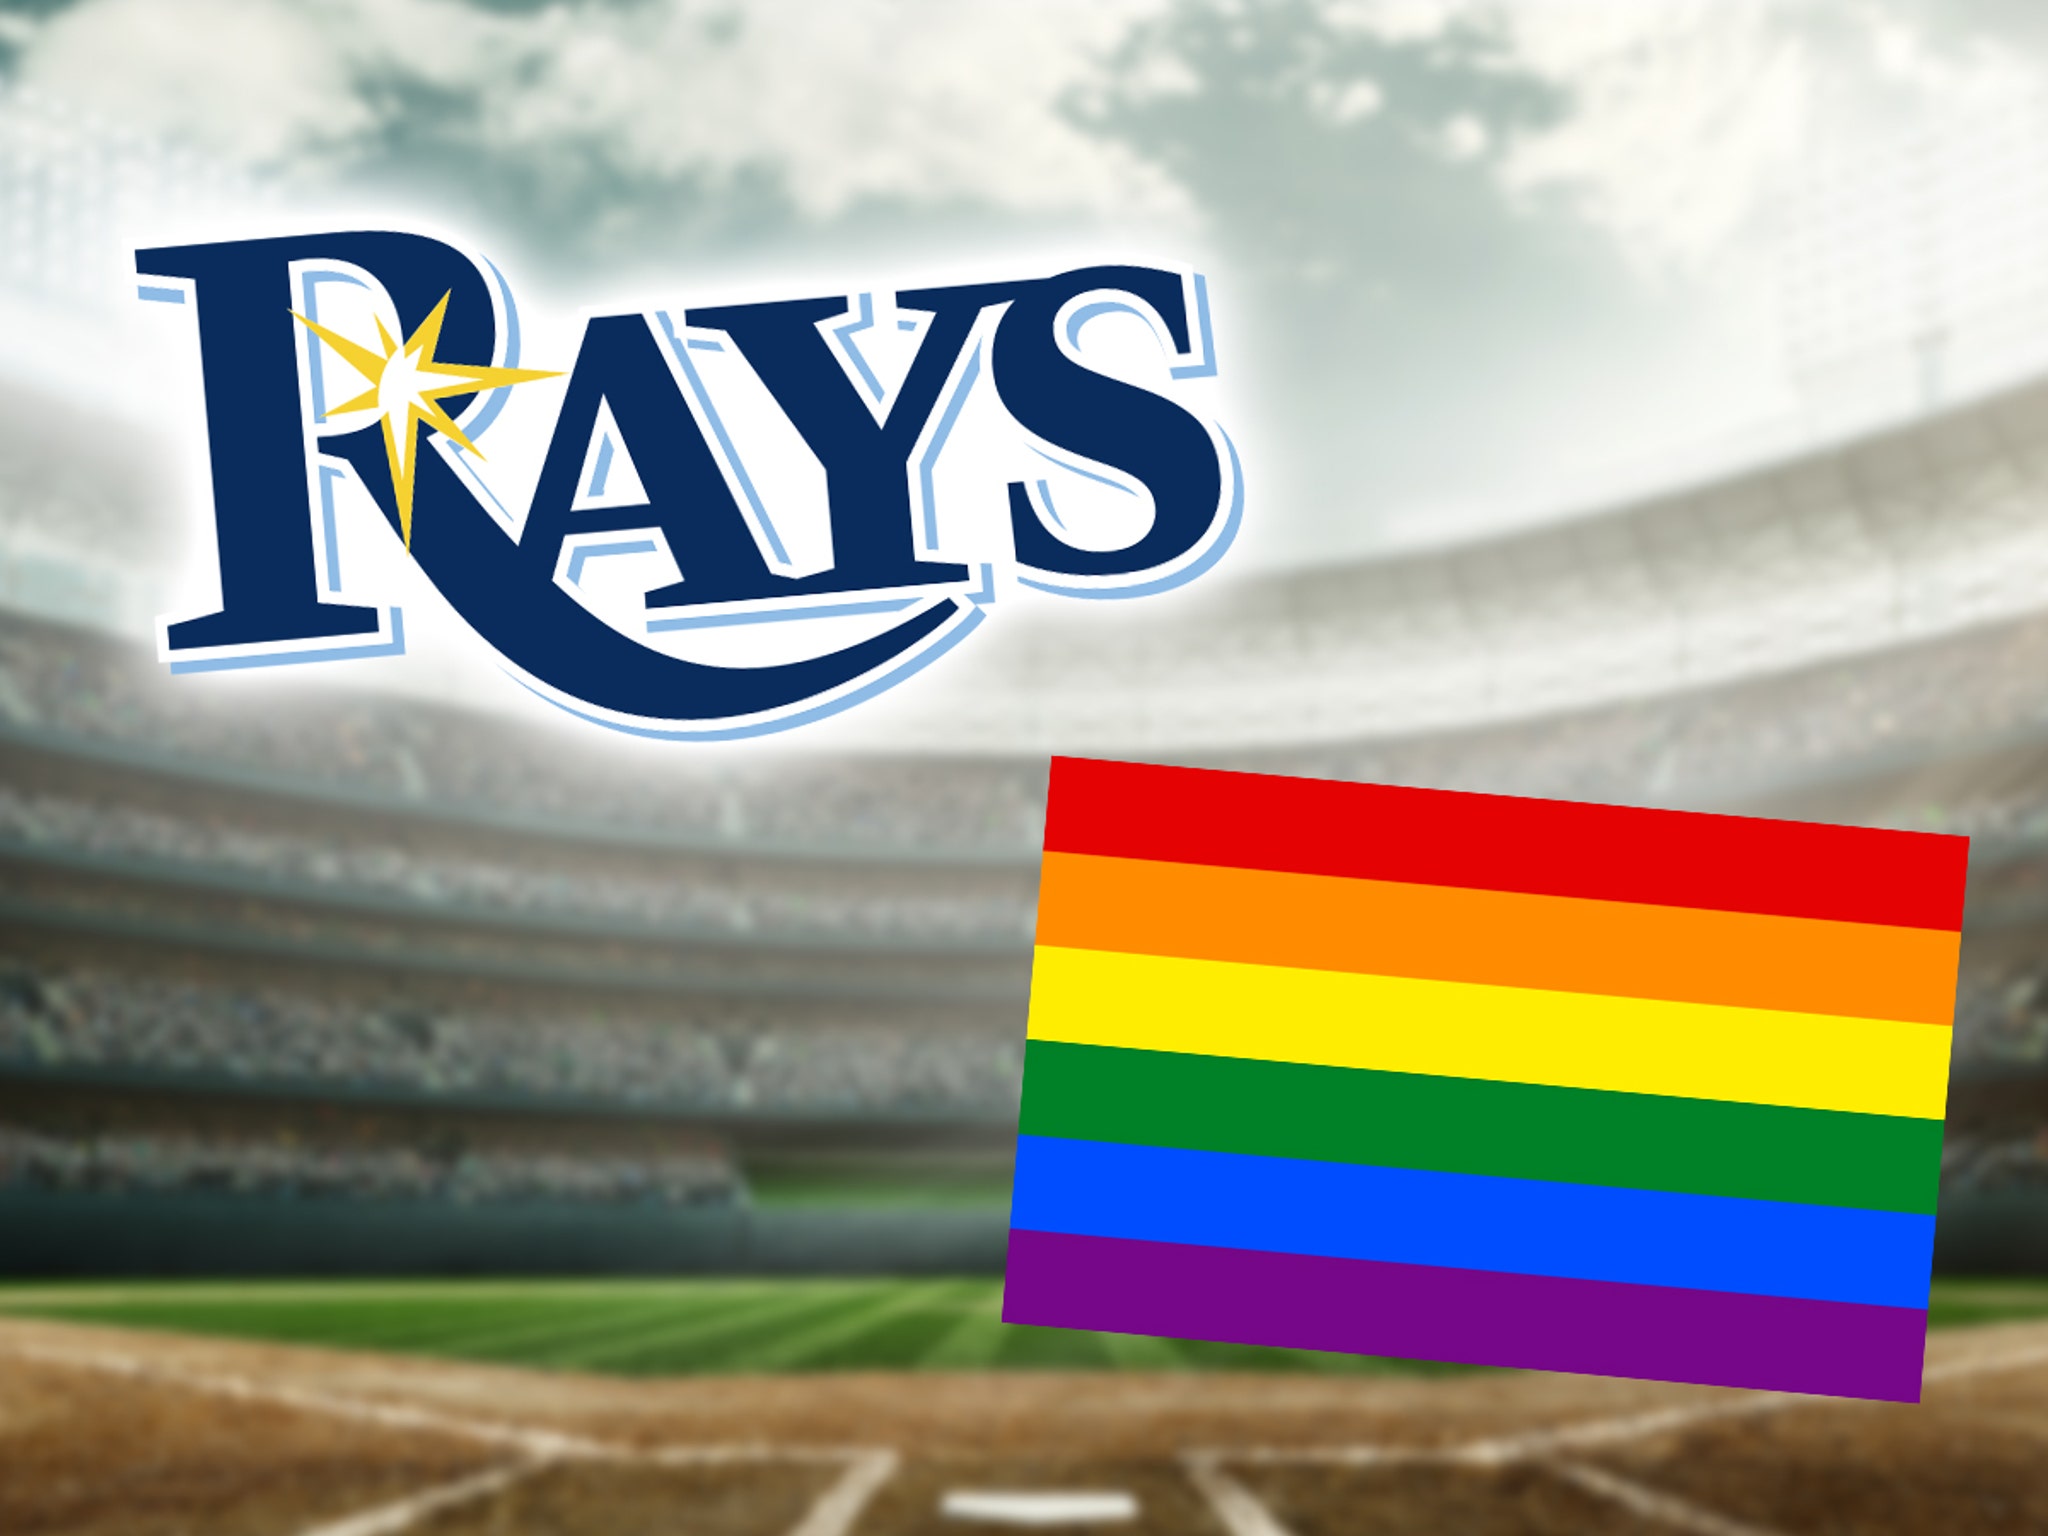 The Tampa Bay Rays, Pride, and the Perils of Corporate Branding